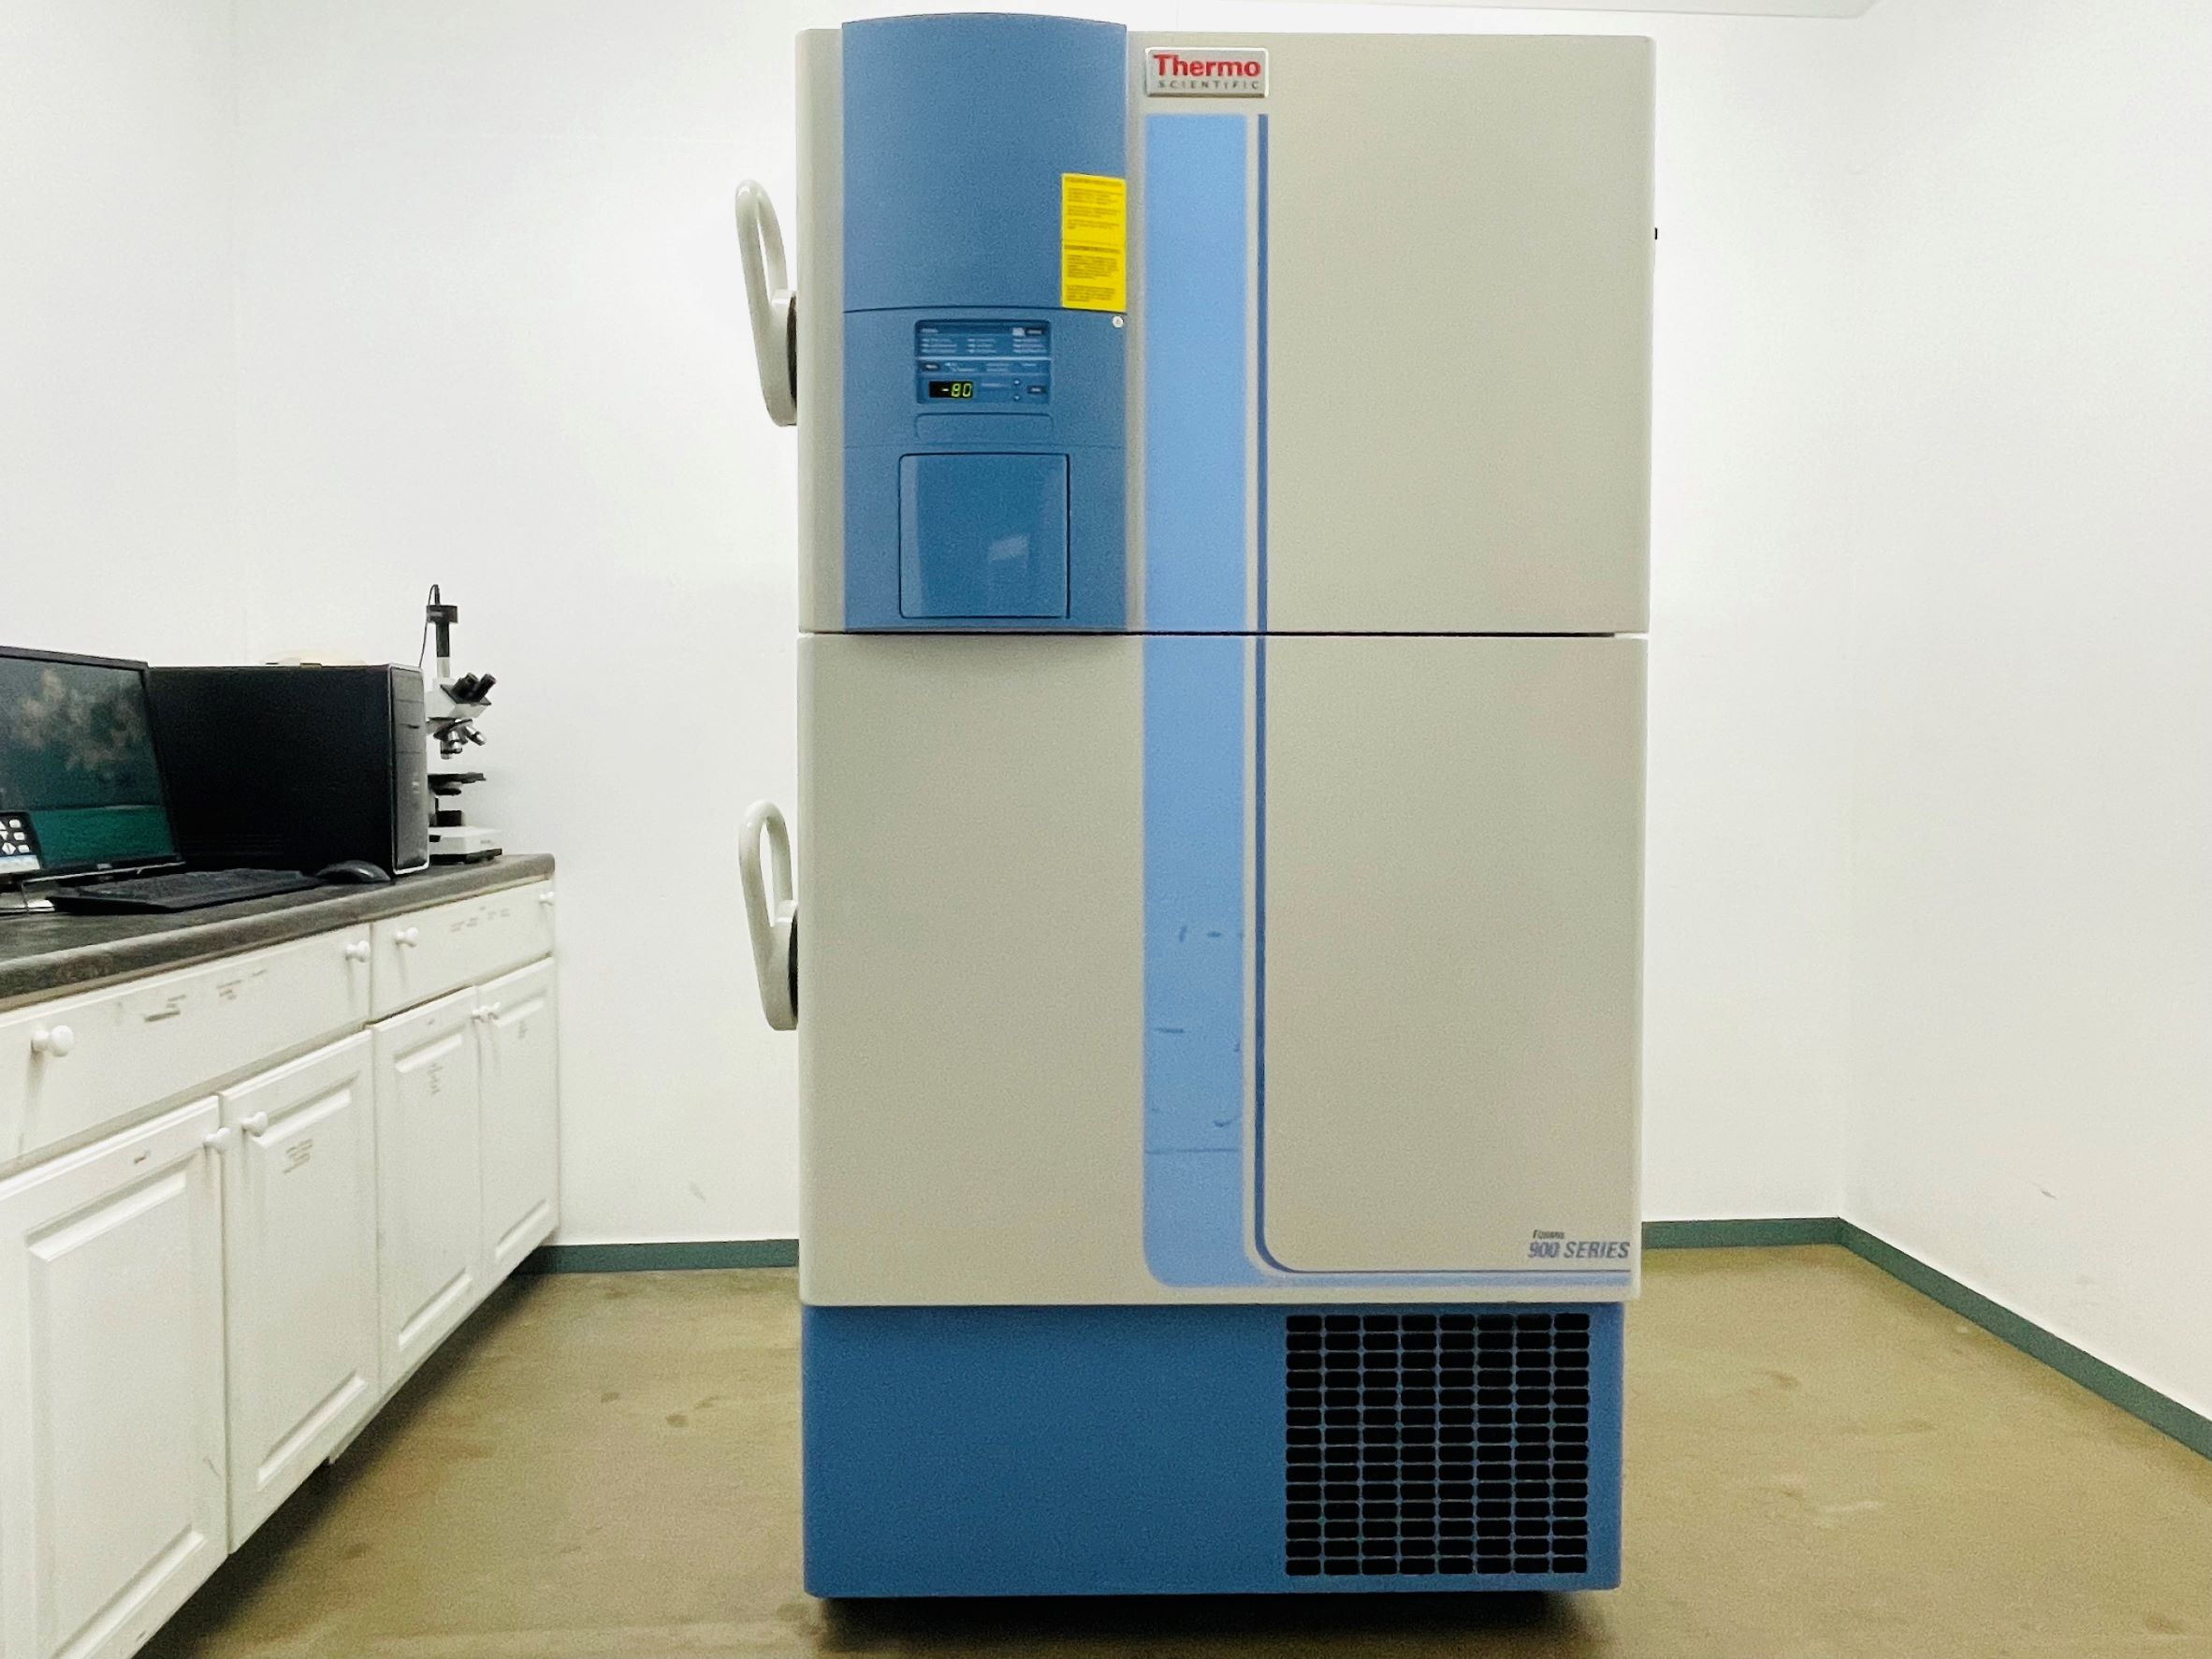 Fully Working Thermo Forma 900 Series Ultra Low Temperature -80C Lab Freezer with Warranty